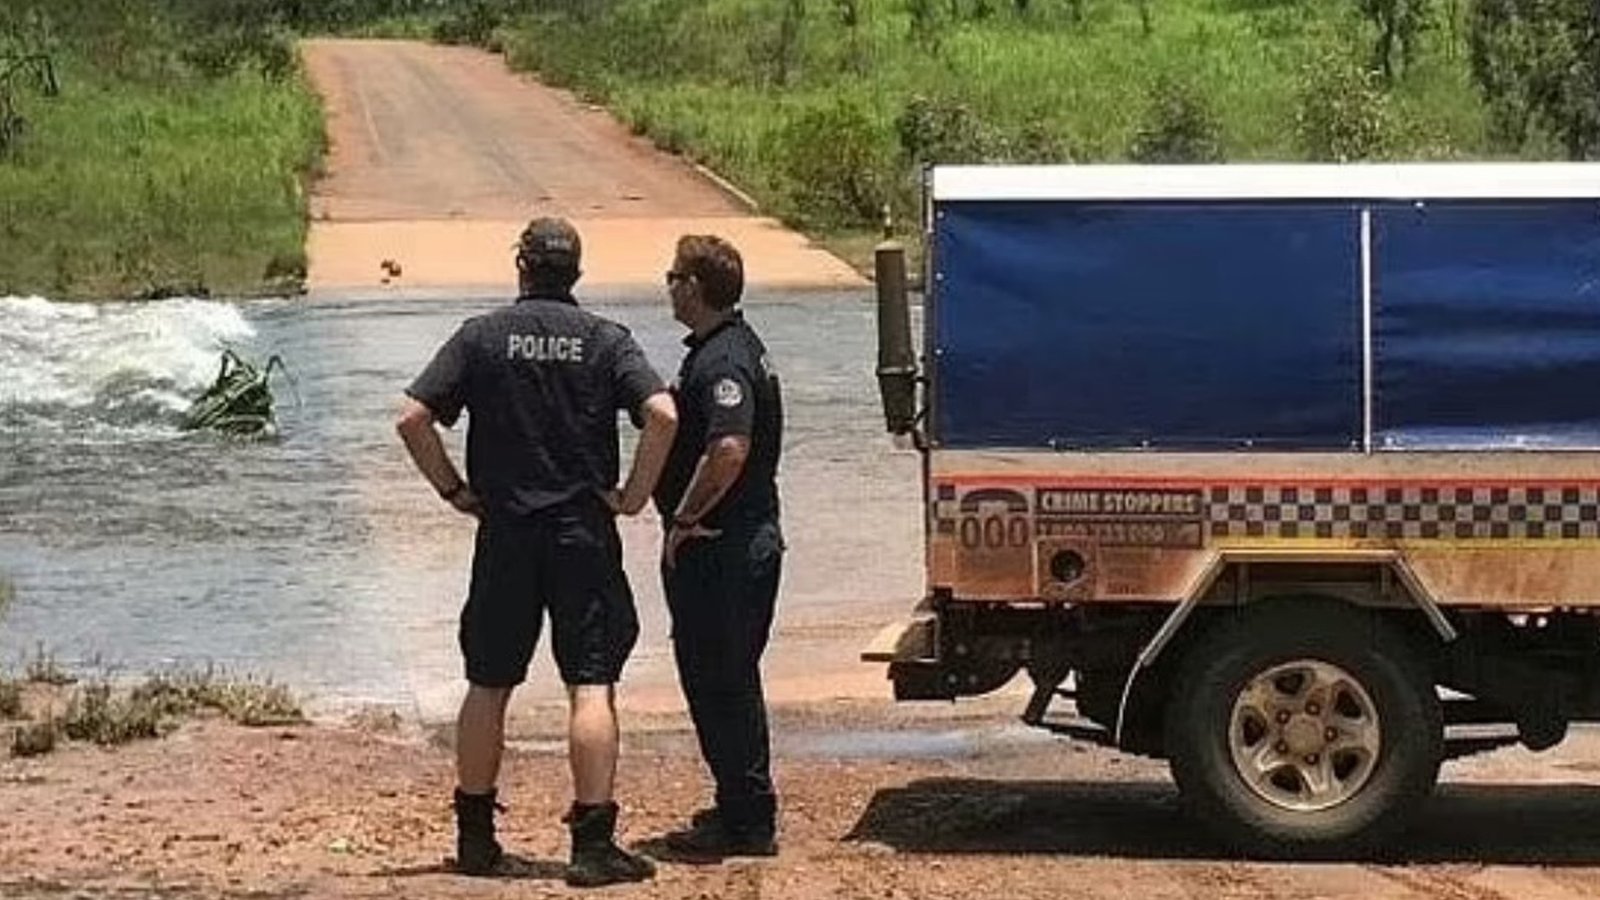 Girl, 12, snatched in horror croc attack while swimming in creek as police launch hunt for beast